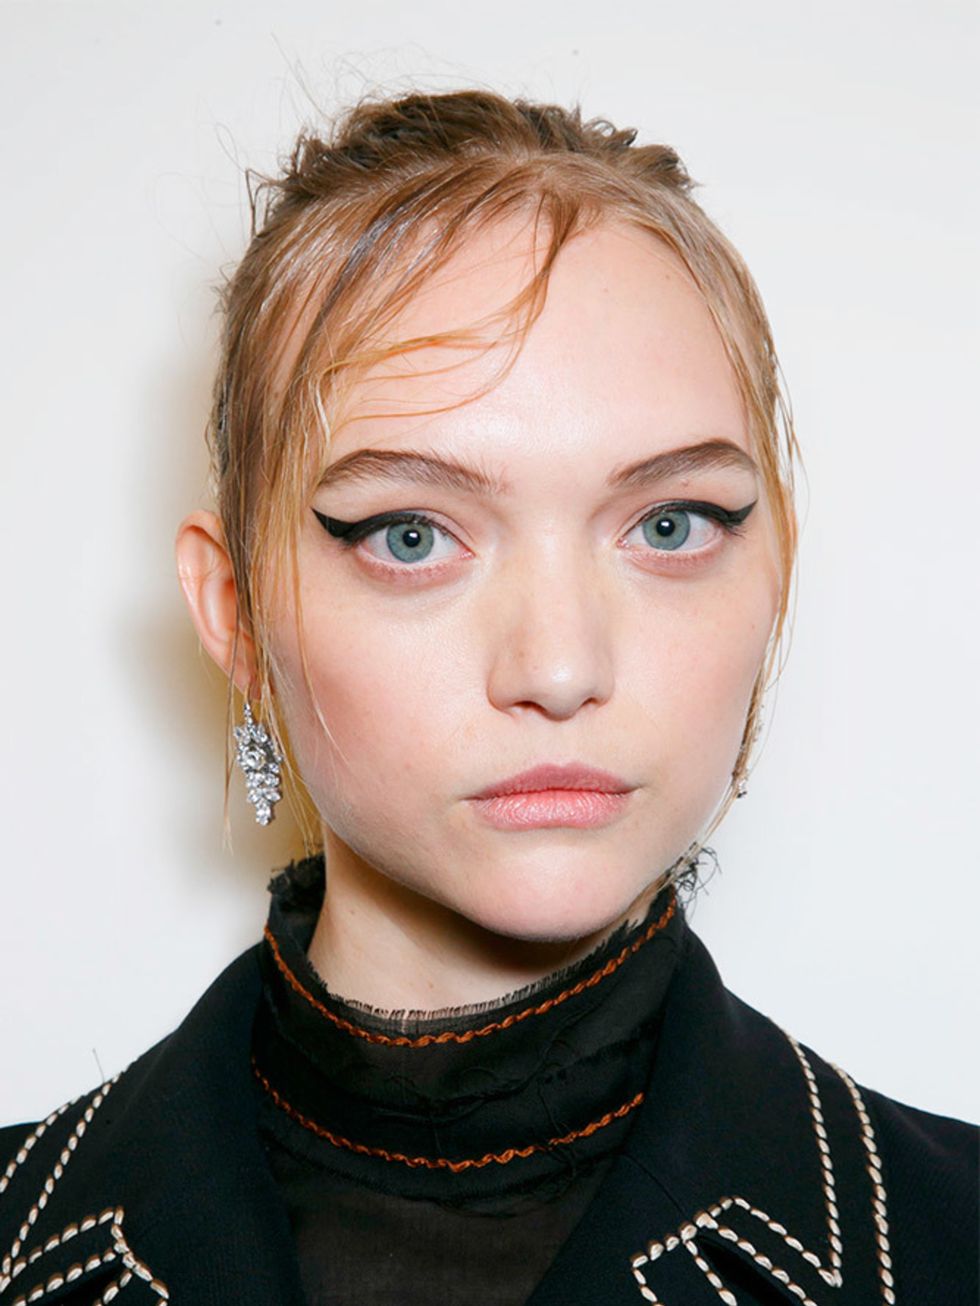 <p><a href="http://www.elleuk.com/catwalk/prada/spring-summer-2015">Prada   </a></p>

<p>The look: Faux plucked brows</p>

<p>Make-up artist: Pat McGrath</p>

<p>Key products: A mix of black and grey cream liners and a fine-tipped eyeliner brush (ELLE Lov